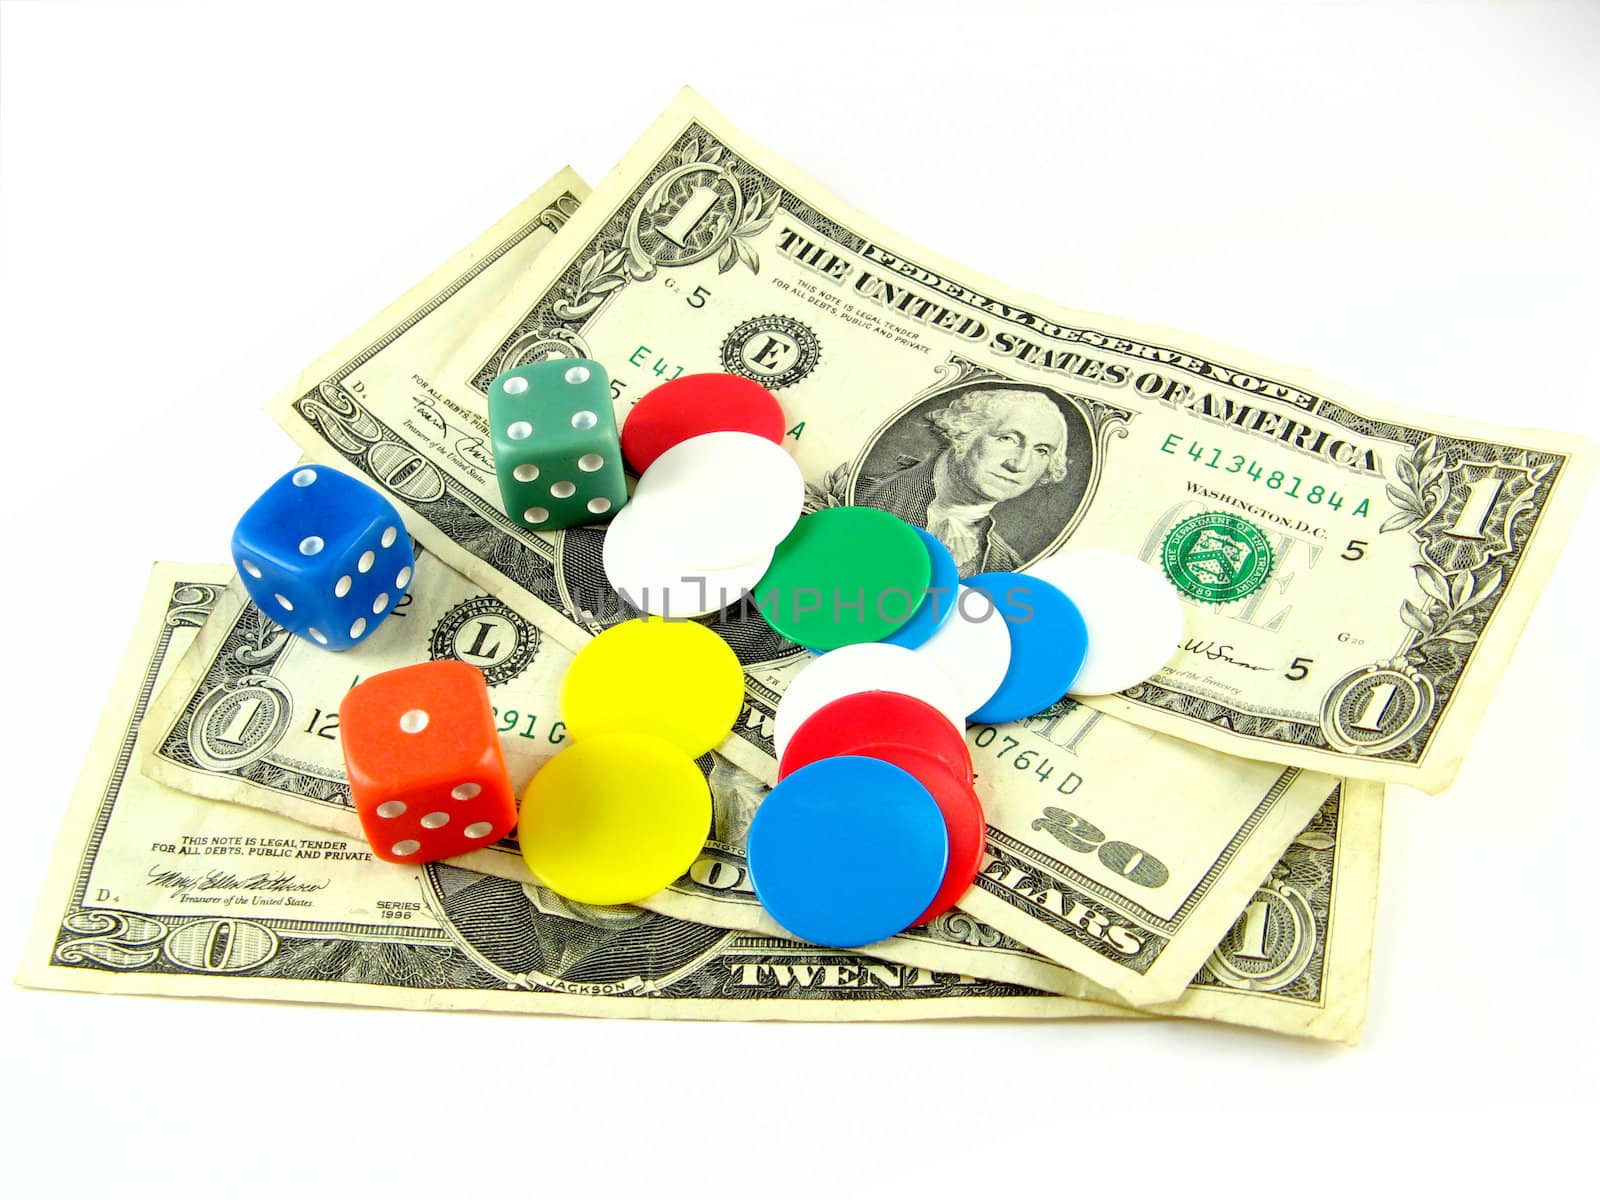 dices,tokens and dollars over a white background